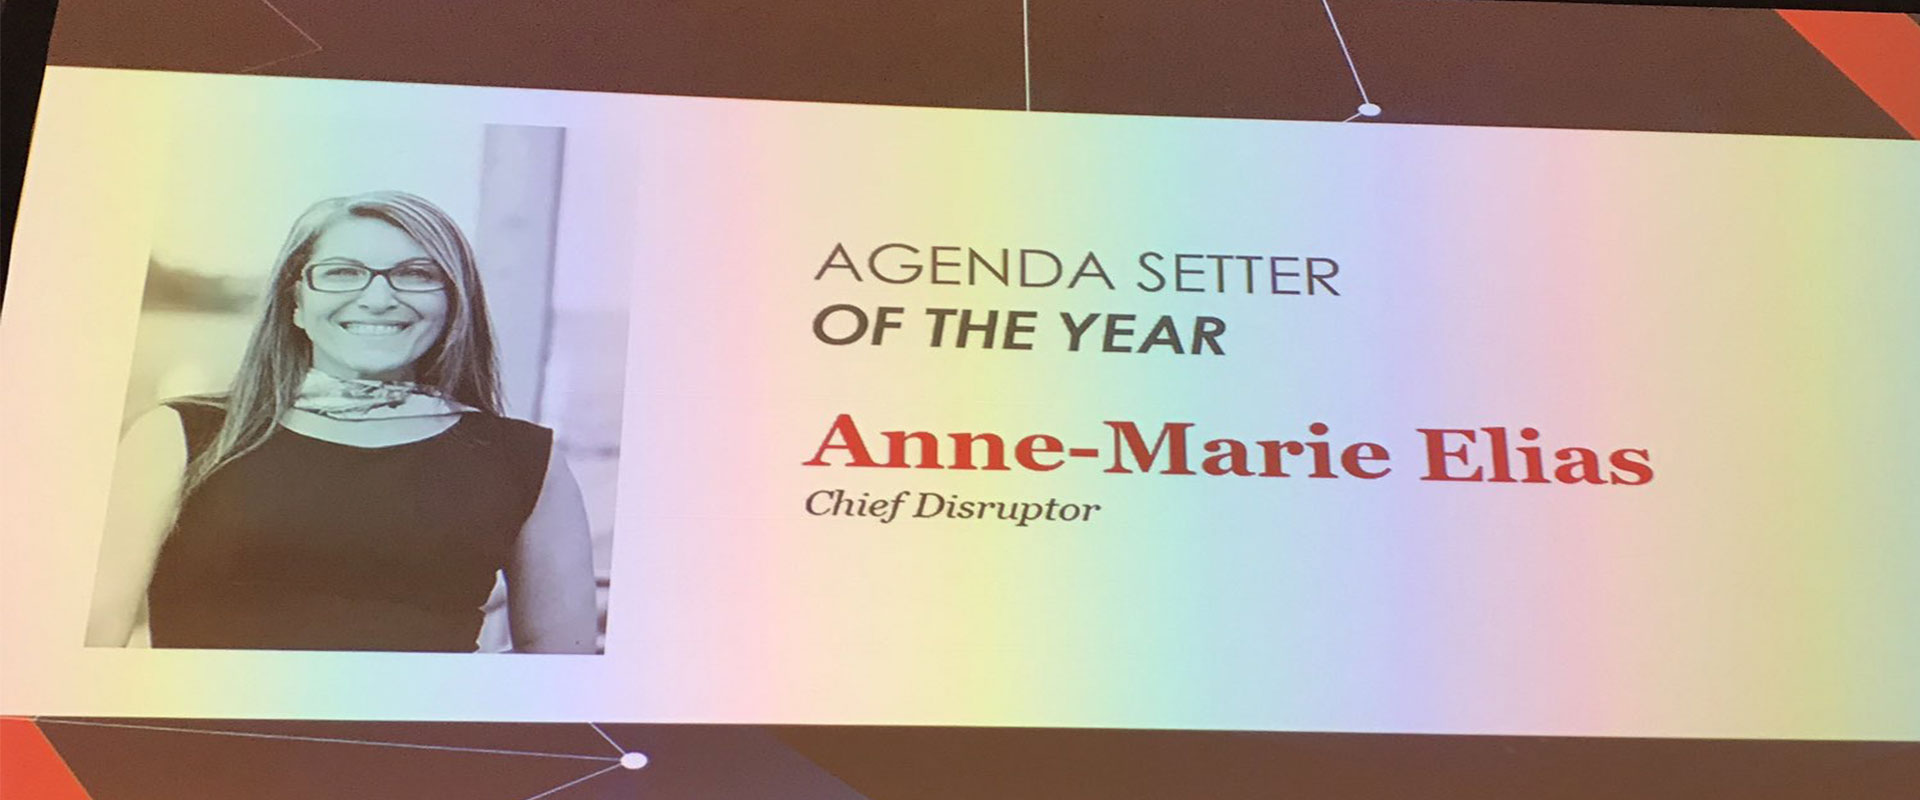 Anne-Marie Elias Agenda Setter Of The Year